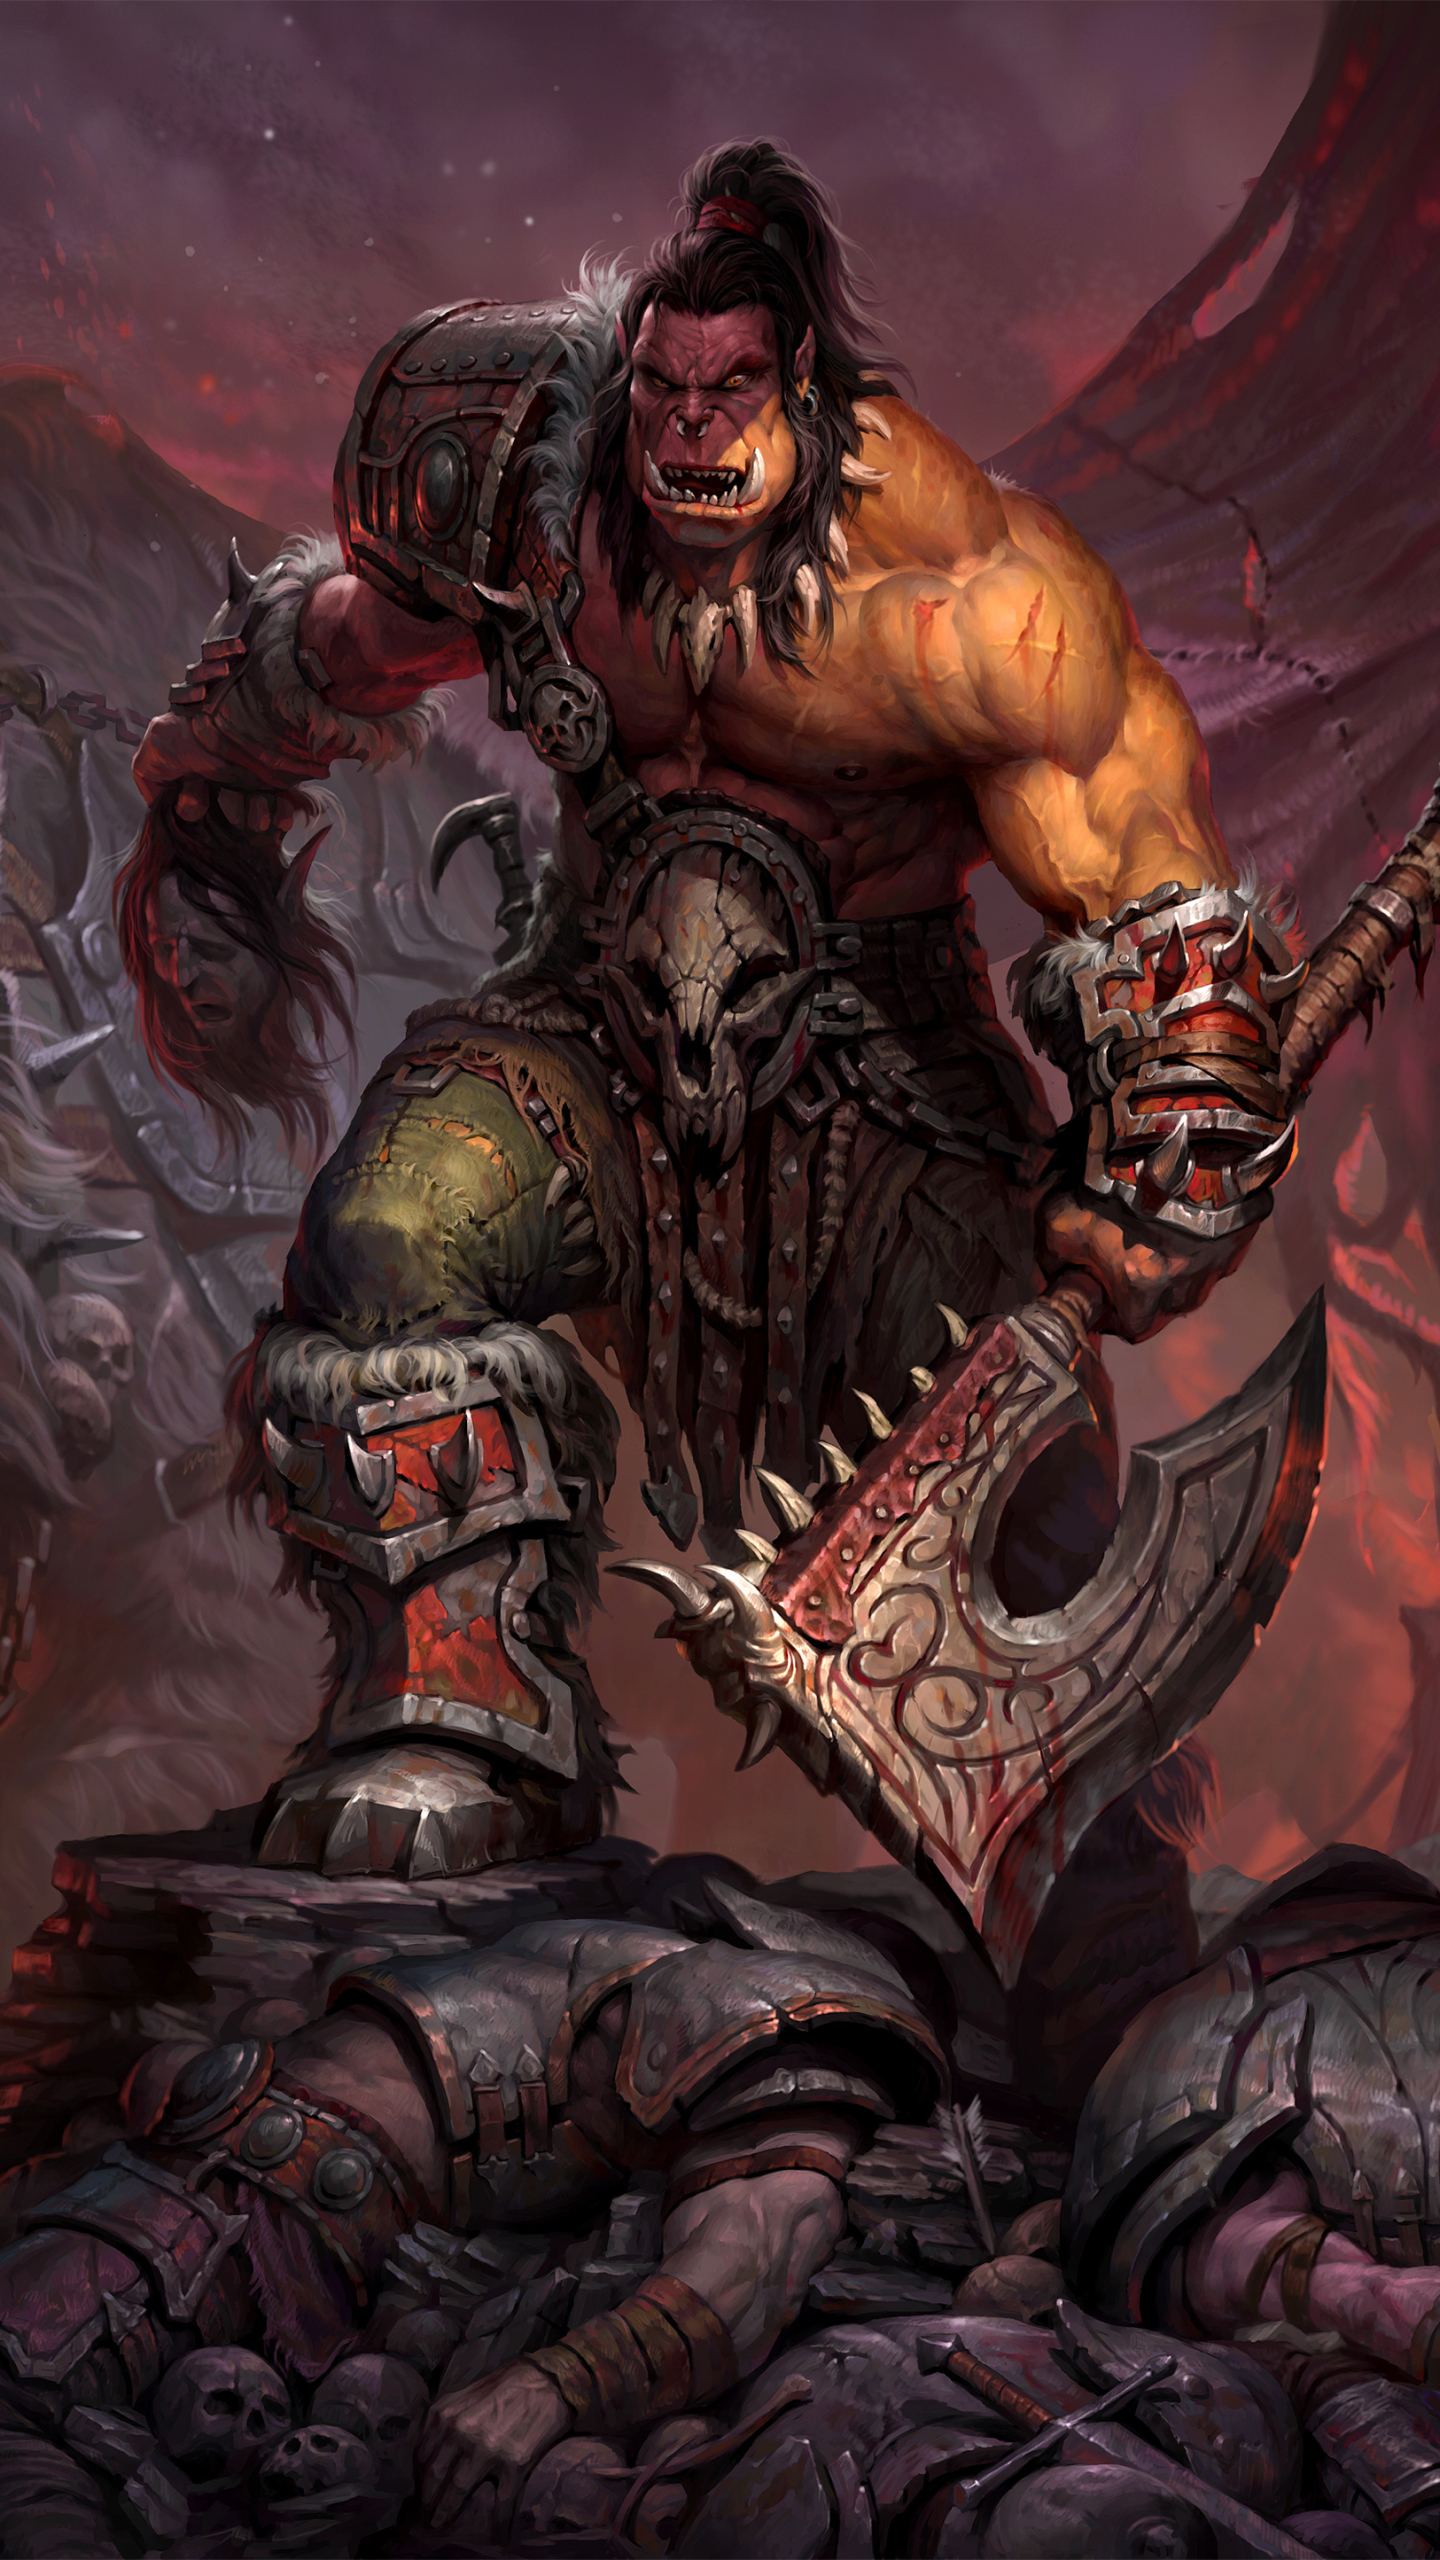 video game, world of warcraft: warlords of draenor, world of warcraft phone wallpaper